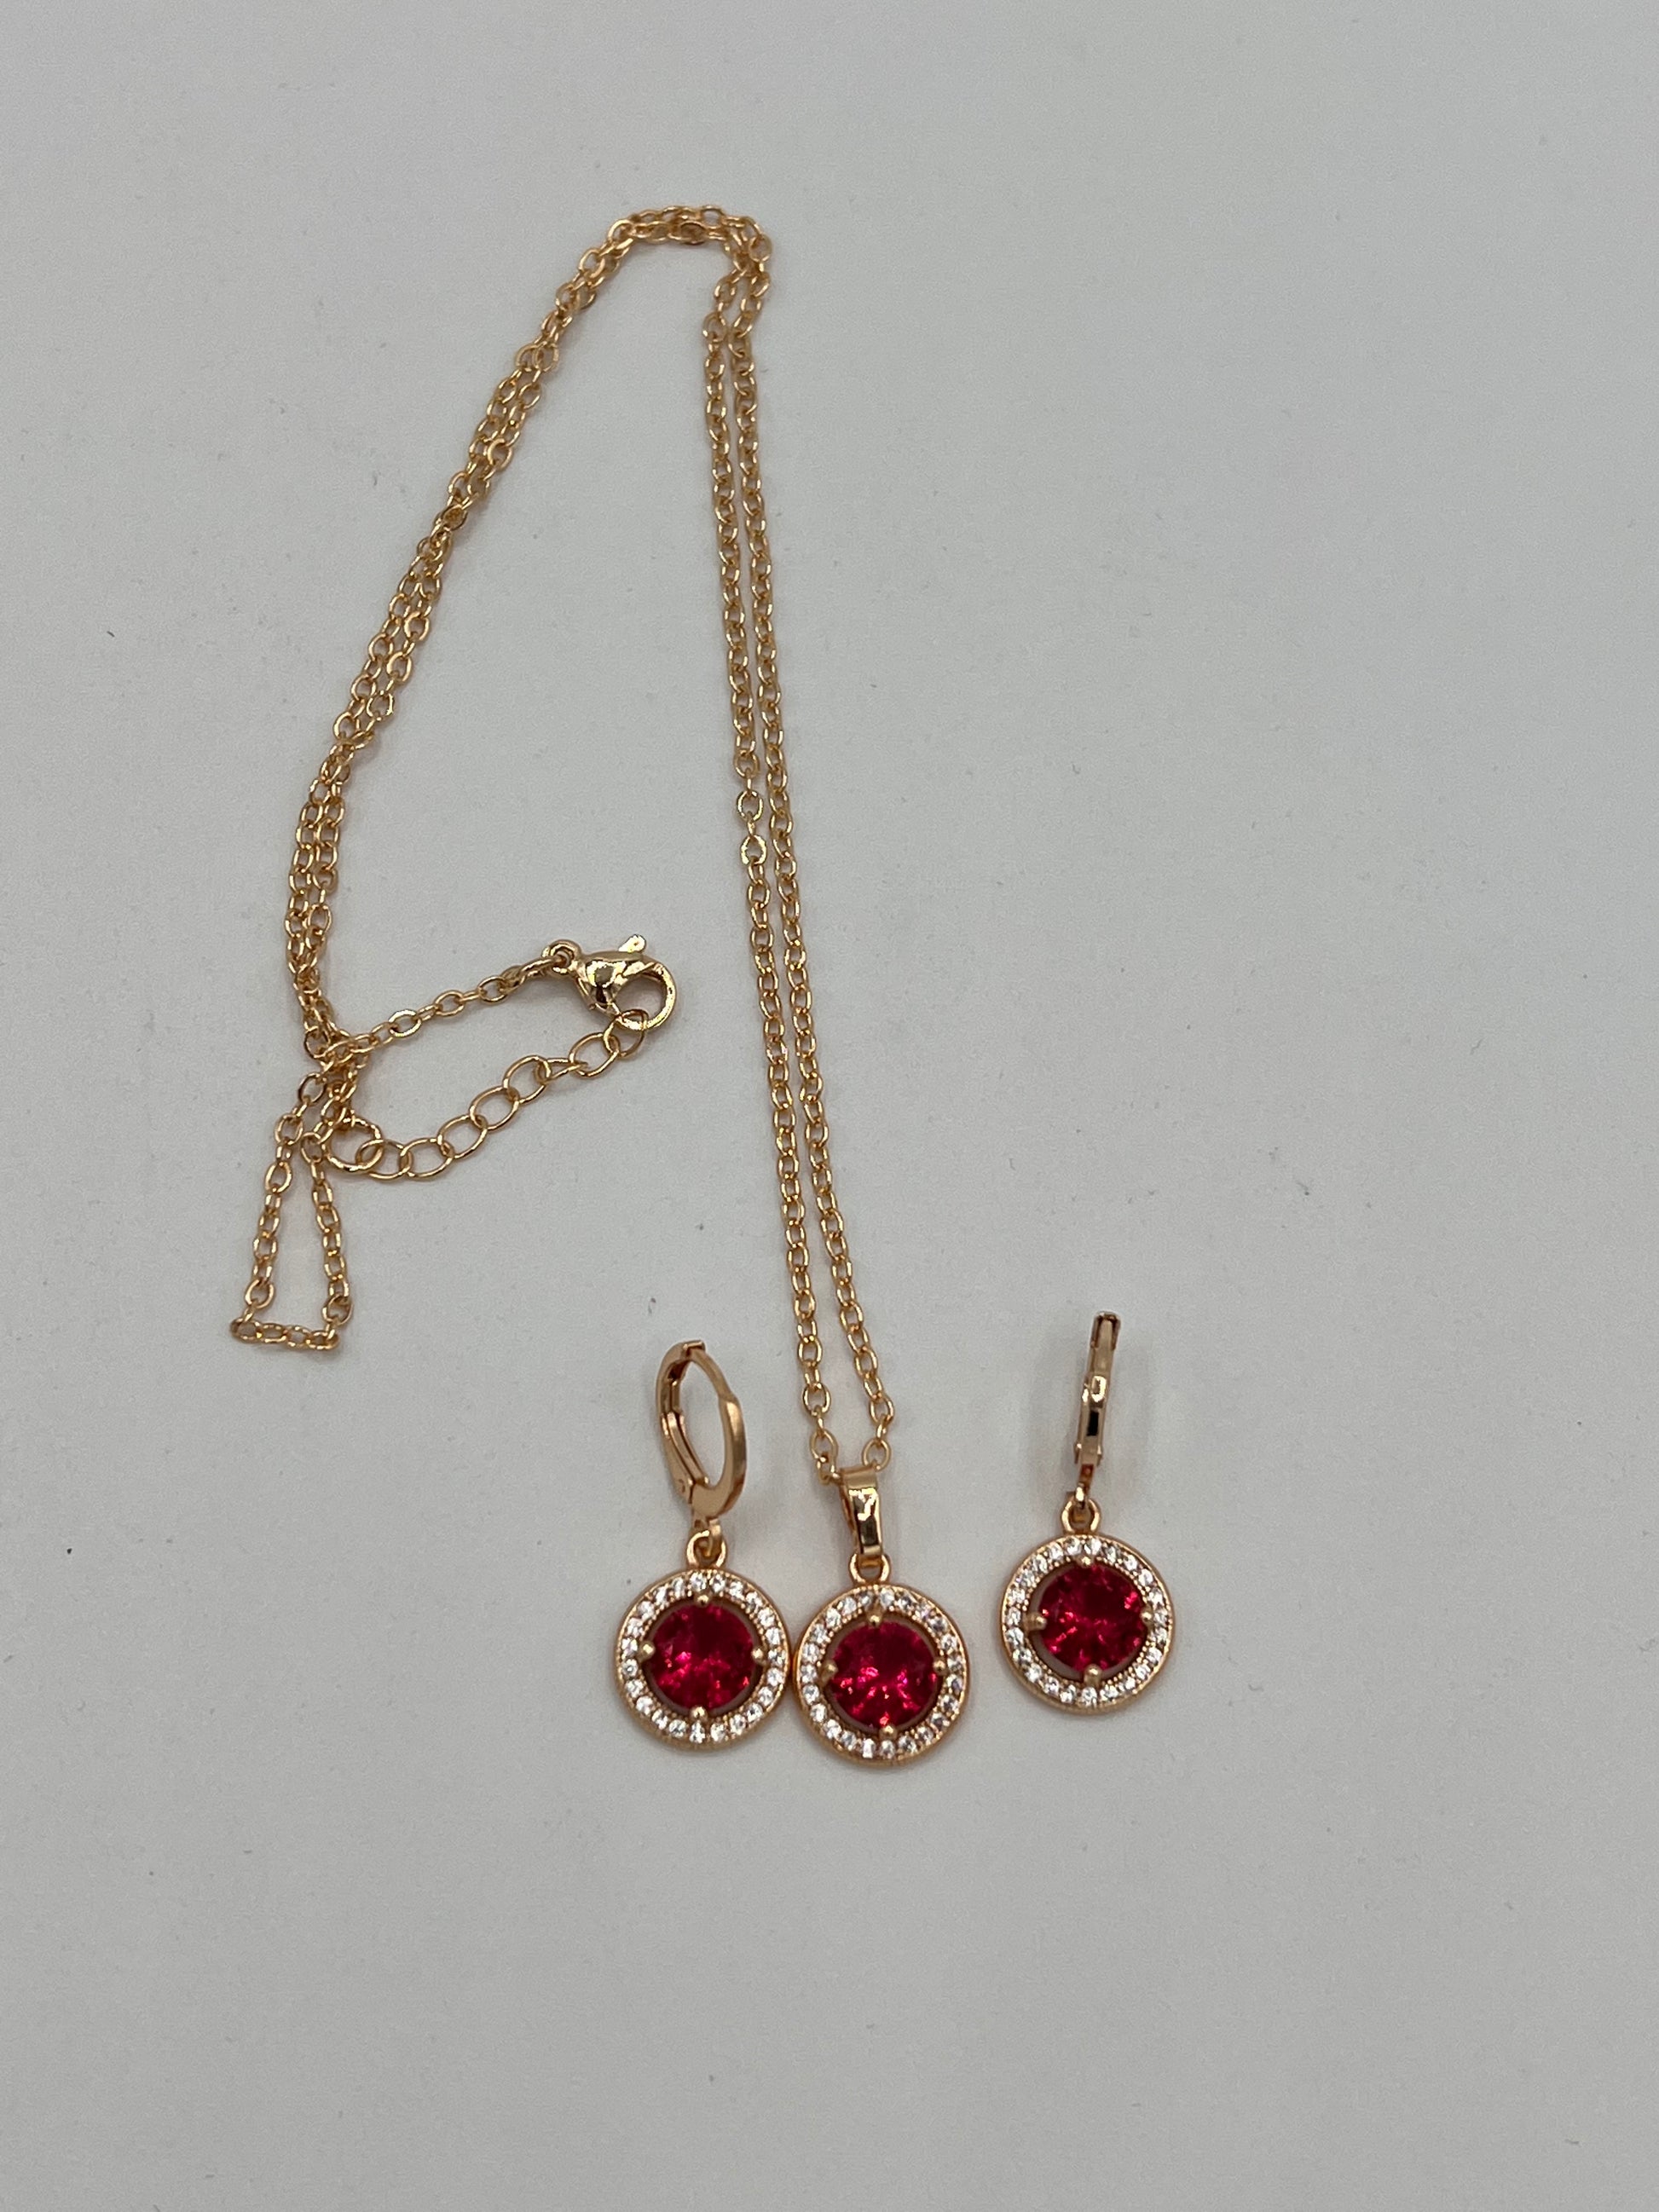 Circle design earrings and necklace sets white cubic zircons  golden circle with red round stone in the middle